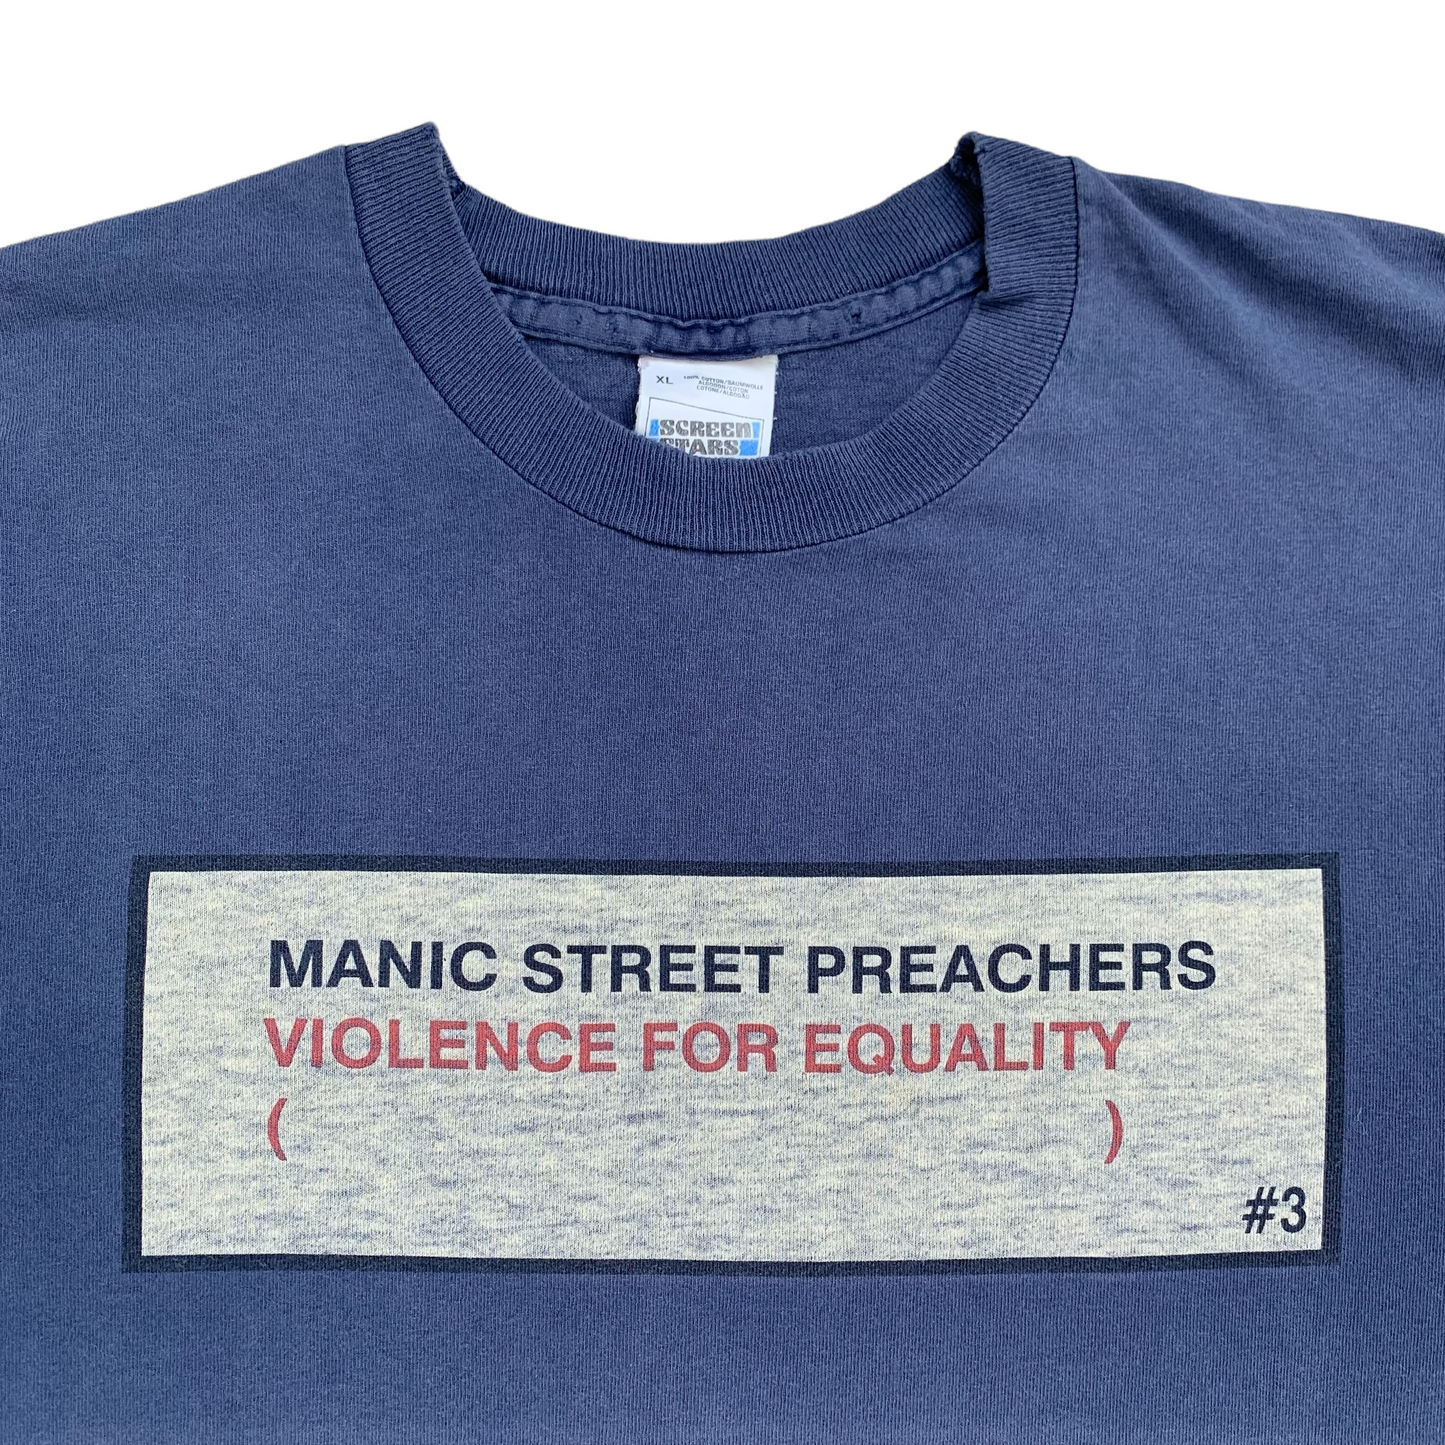 1996 Manic Street Preachers 'Violence For Equality' (XL)